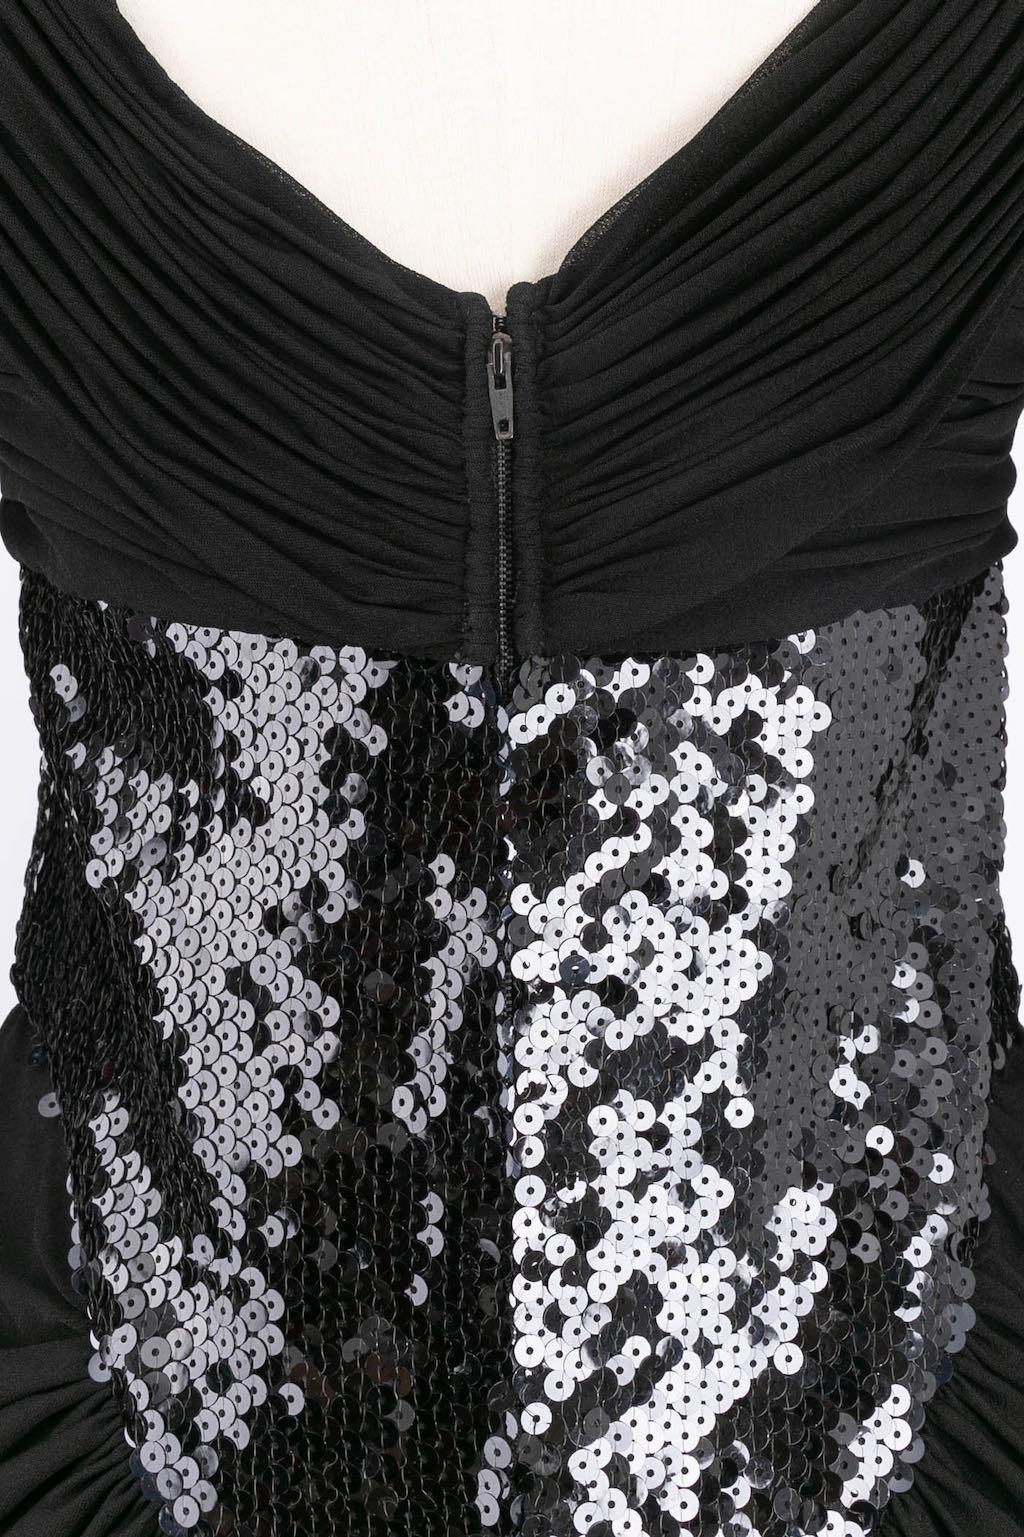 Azzaro Black Sequined Dress, Size 36FR For Sale 3